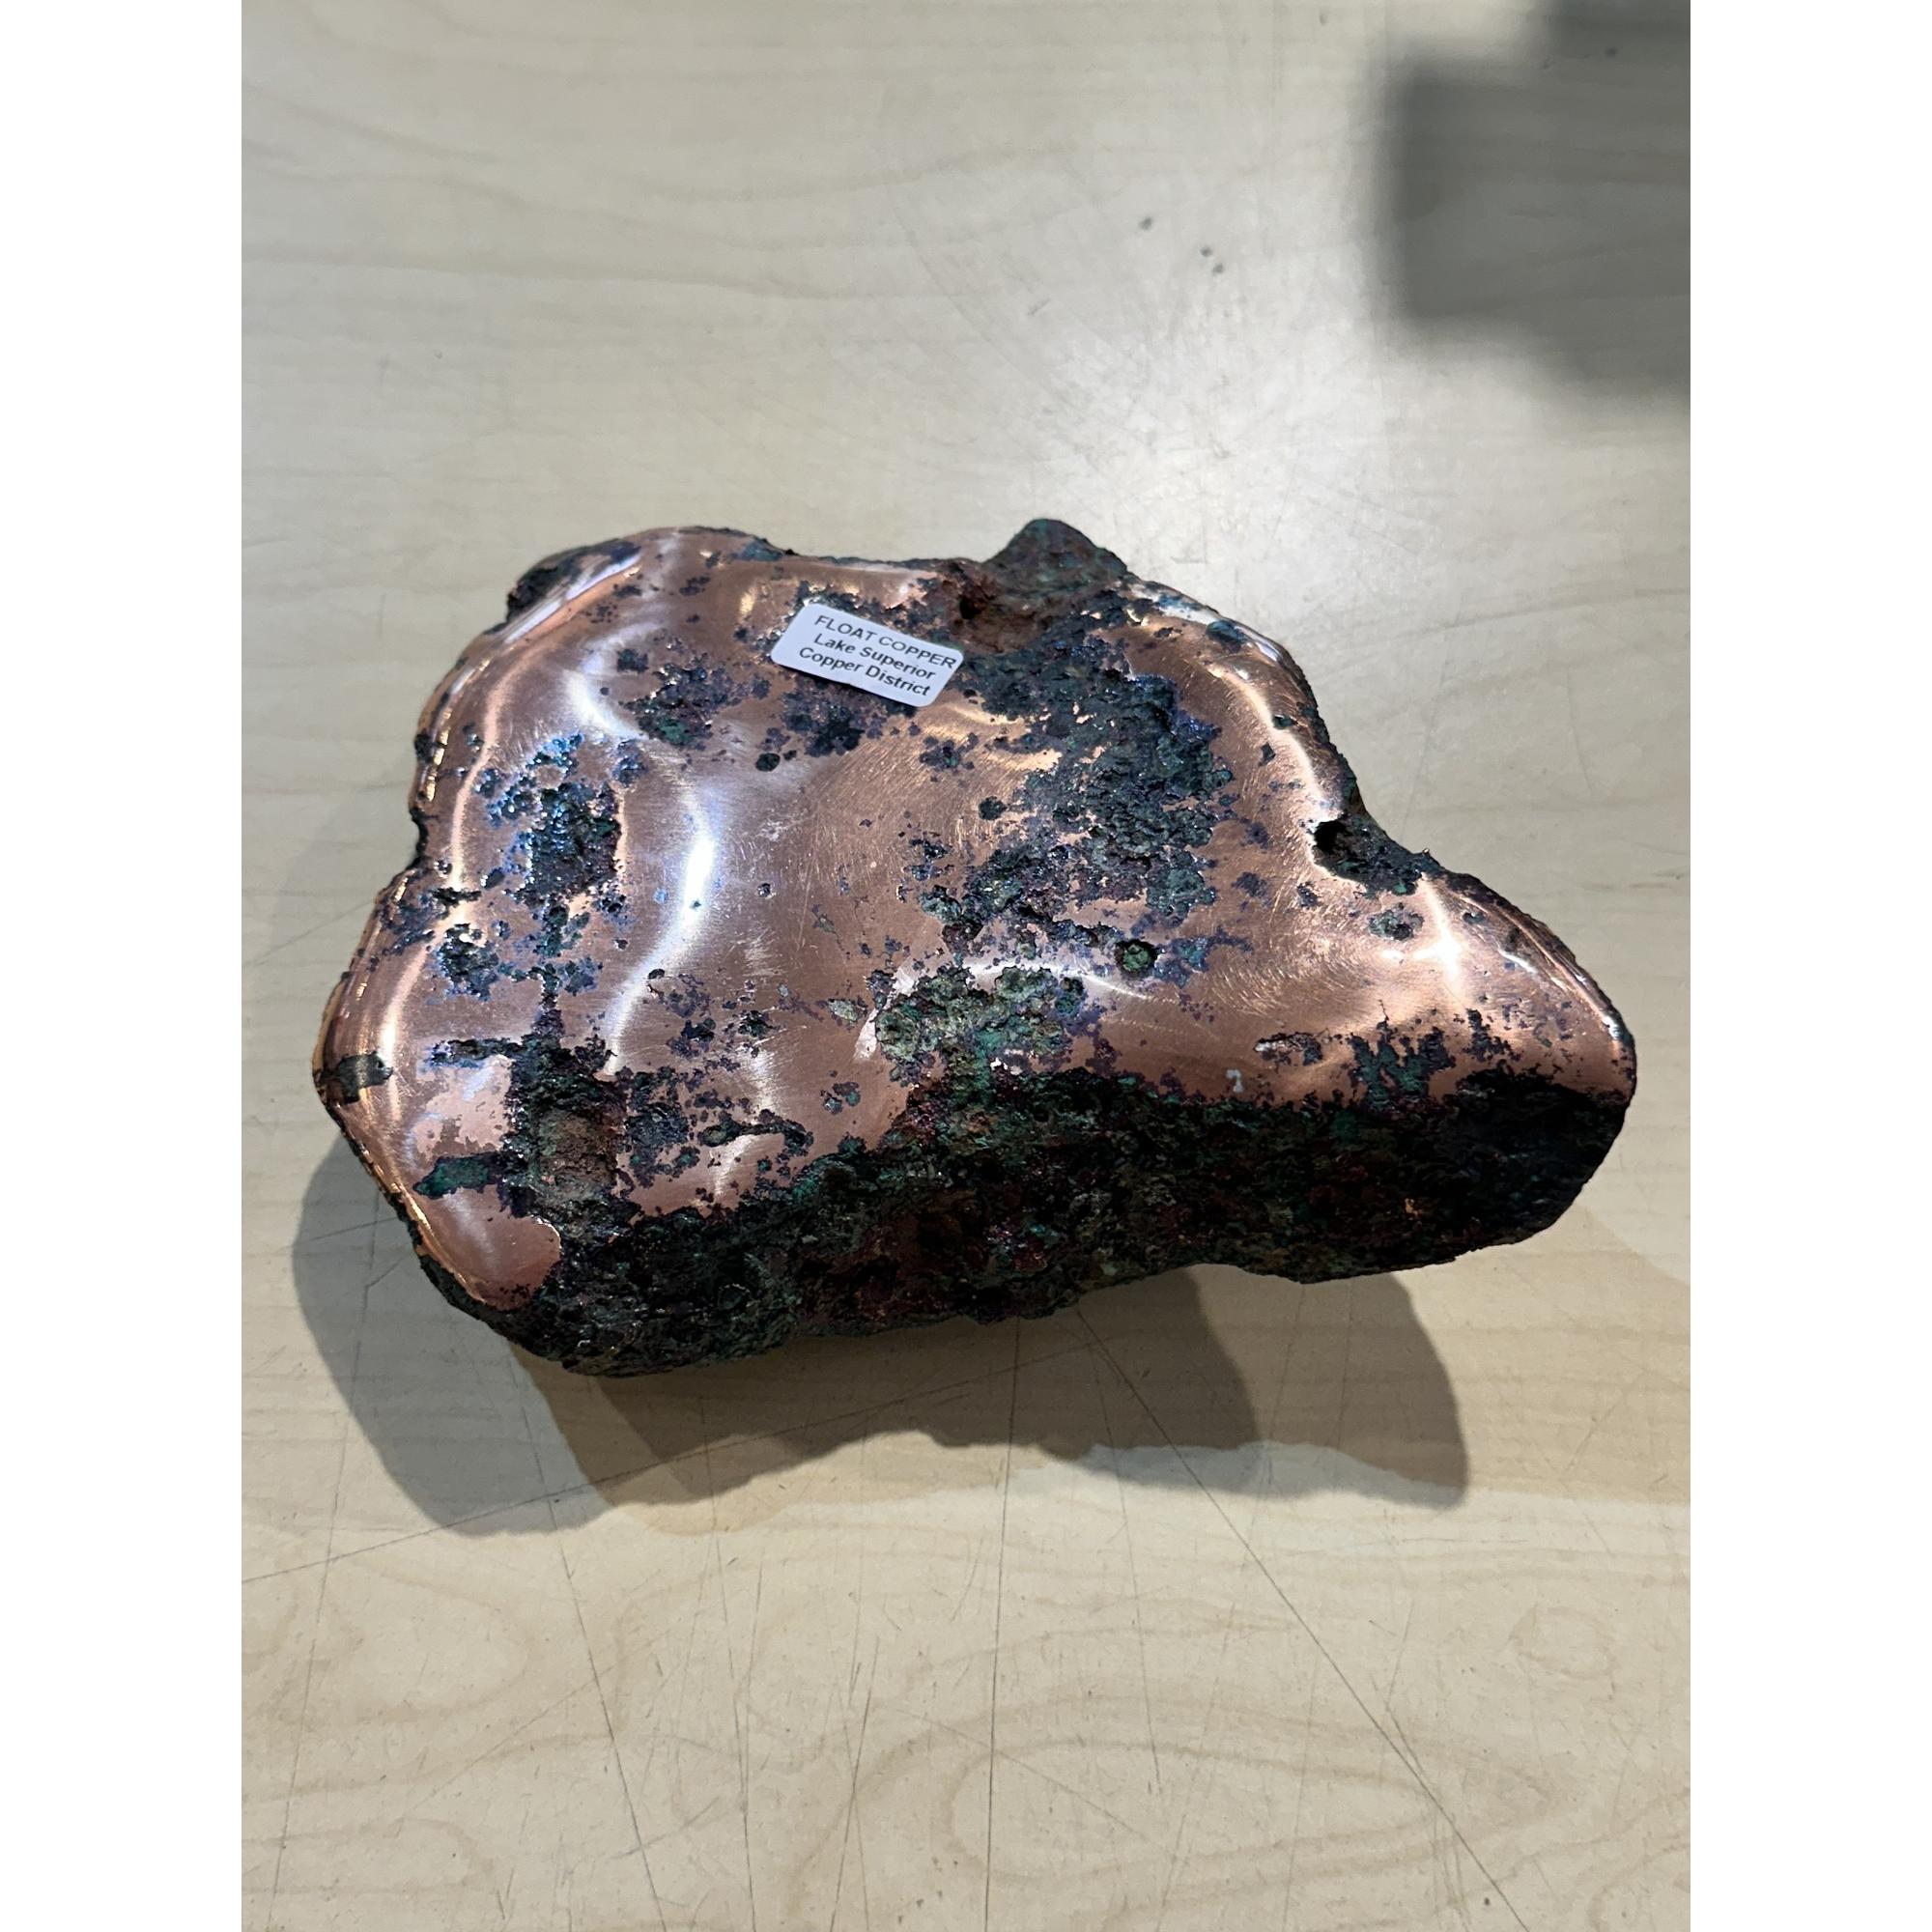 Copper, Glacial Float, Michigan, Over 6 pounds Prehistoric Online